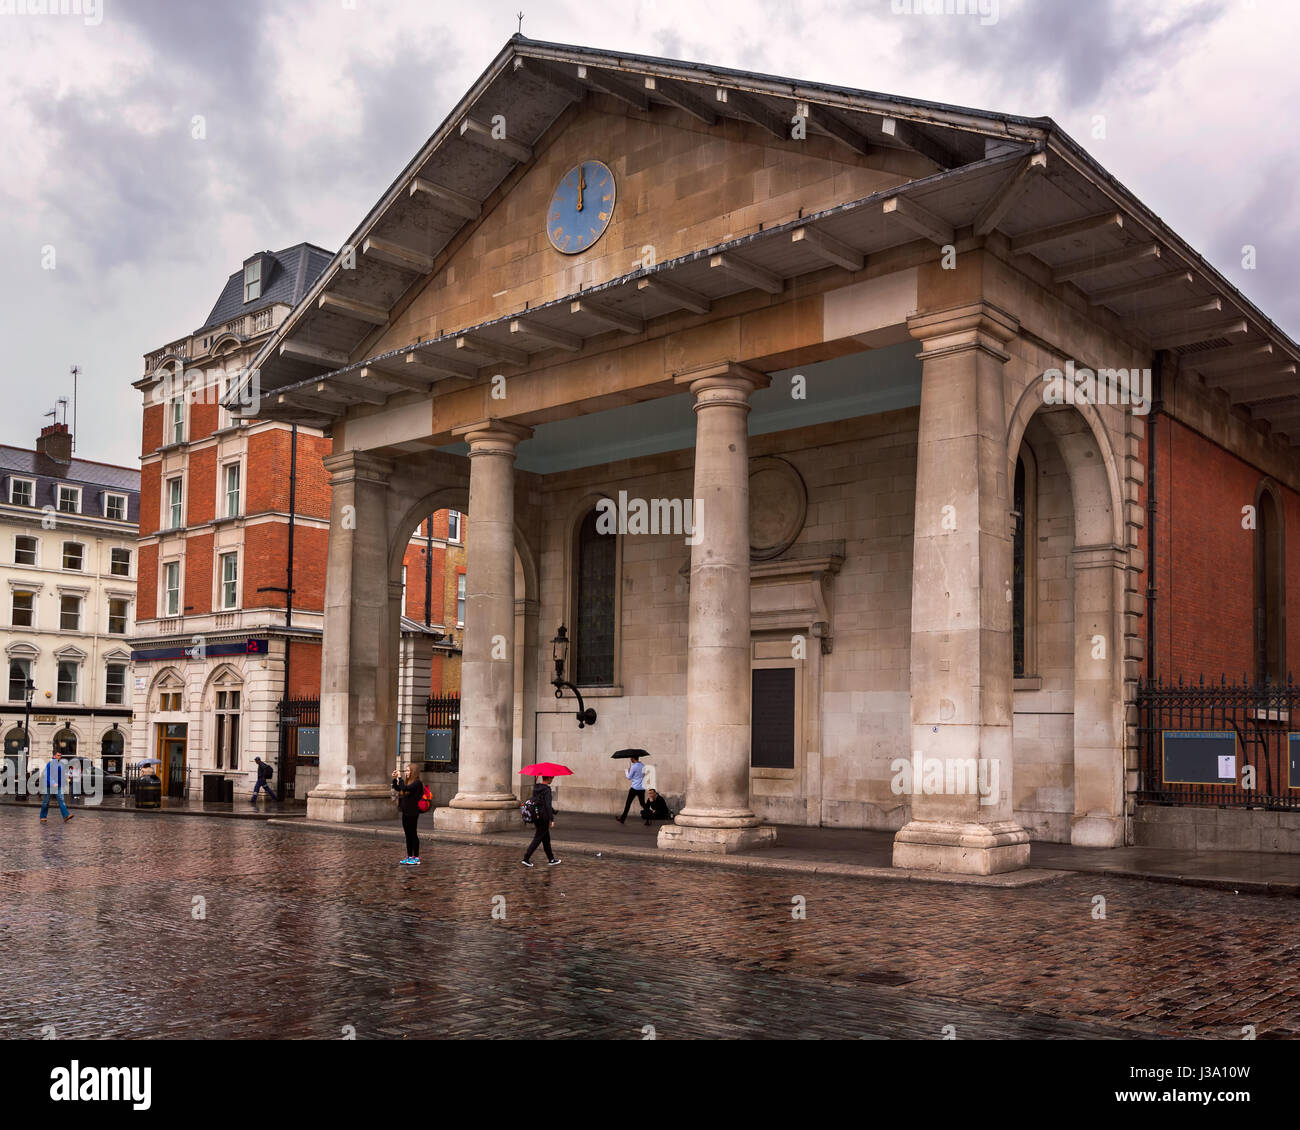 LONDON, UNITED KINGDOM - OCTOBER 6, 2014: Saint Paul's Church in Covent Garden, London. St Paul's Church, also known as the Actors' Church is designed Stock Photo